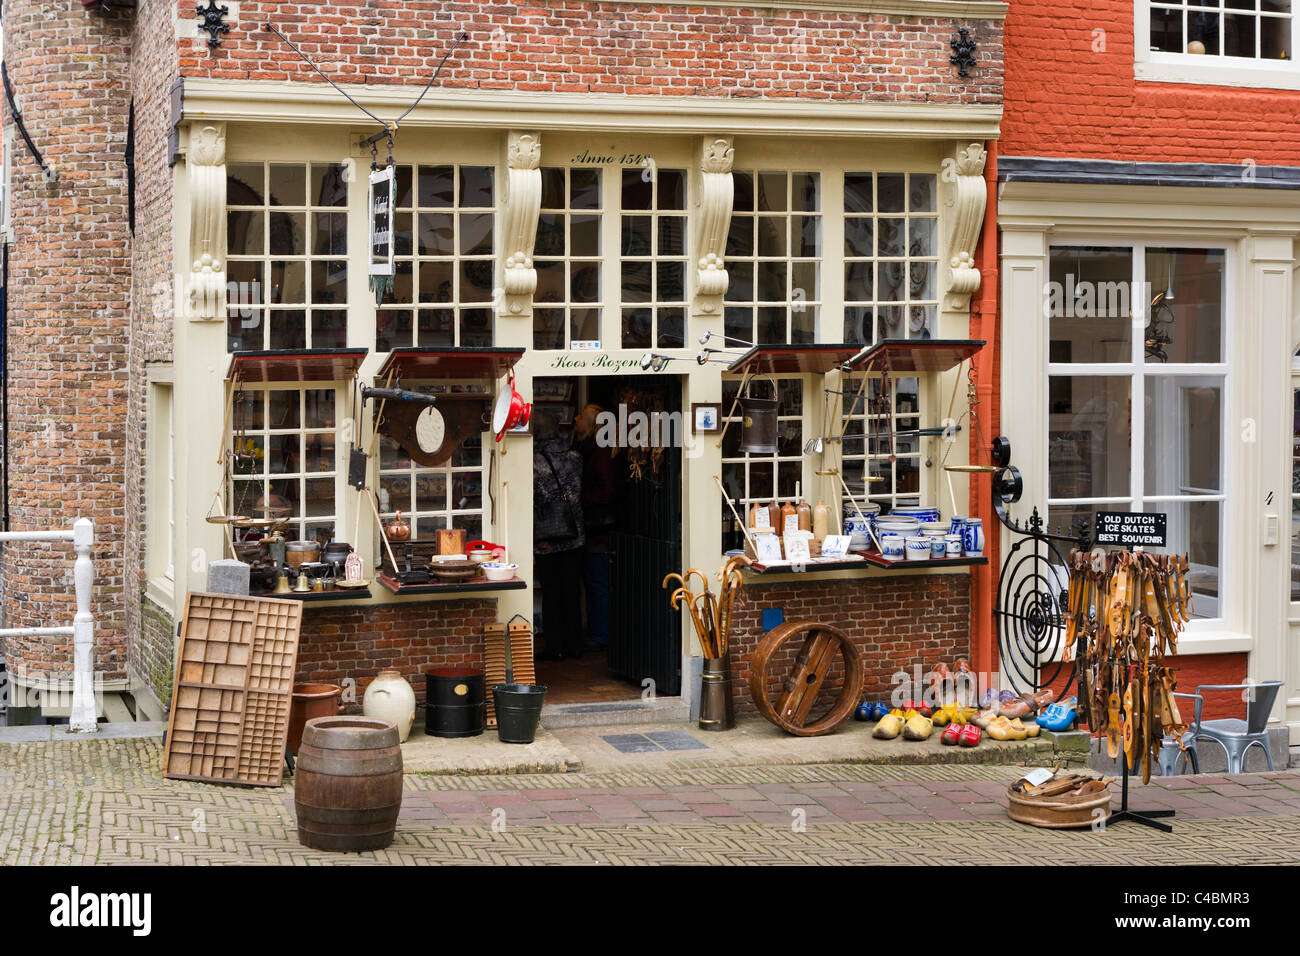 Antique shop in an historic 16thC building on the Markt, Delft, Netherlands Stock Photo